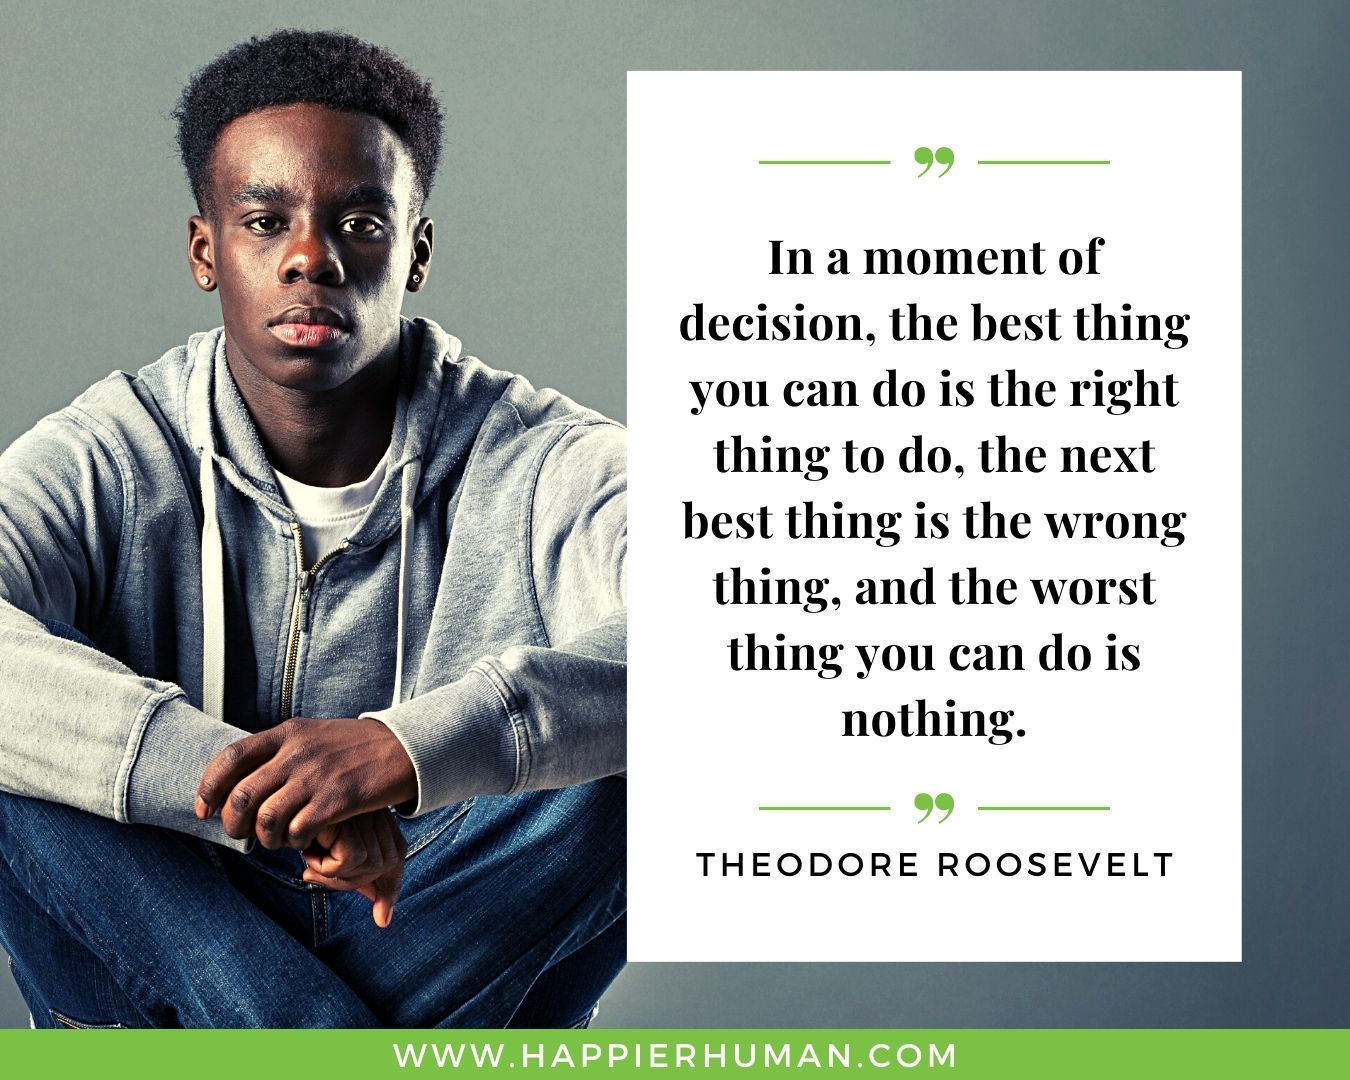 Overthinking Quotes - “In a moment of decision, the best thing you can do is the right thing to do, the next best thing is the wrong thing, and the worst thing you can do is nothing.” - Theodore Roosevelt